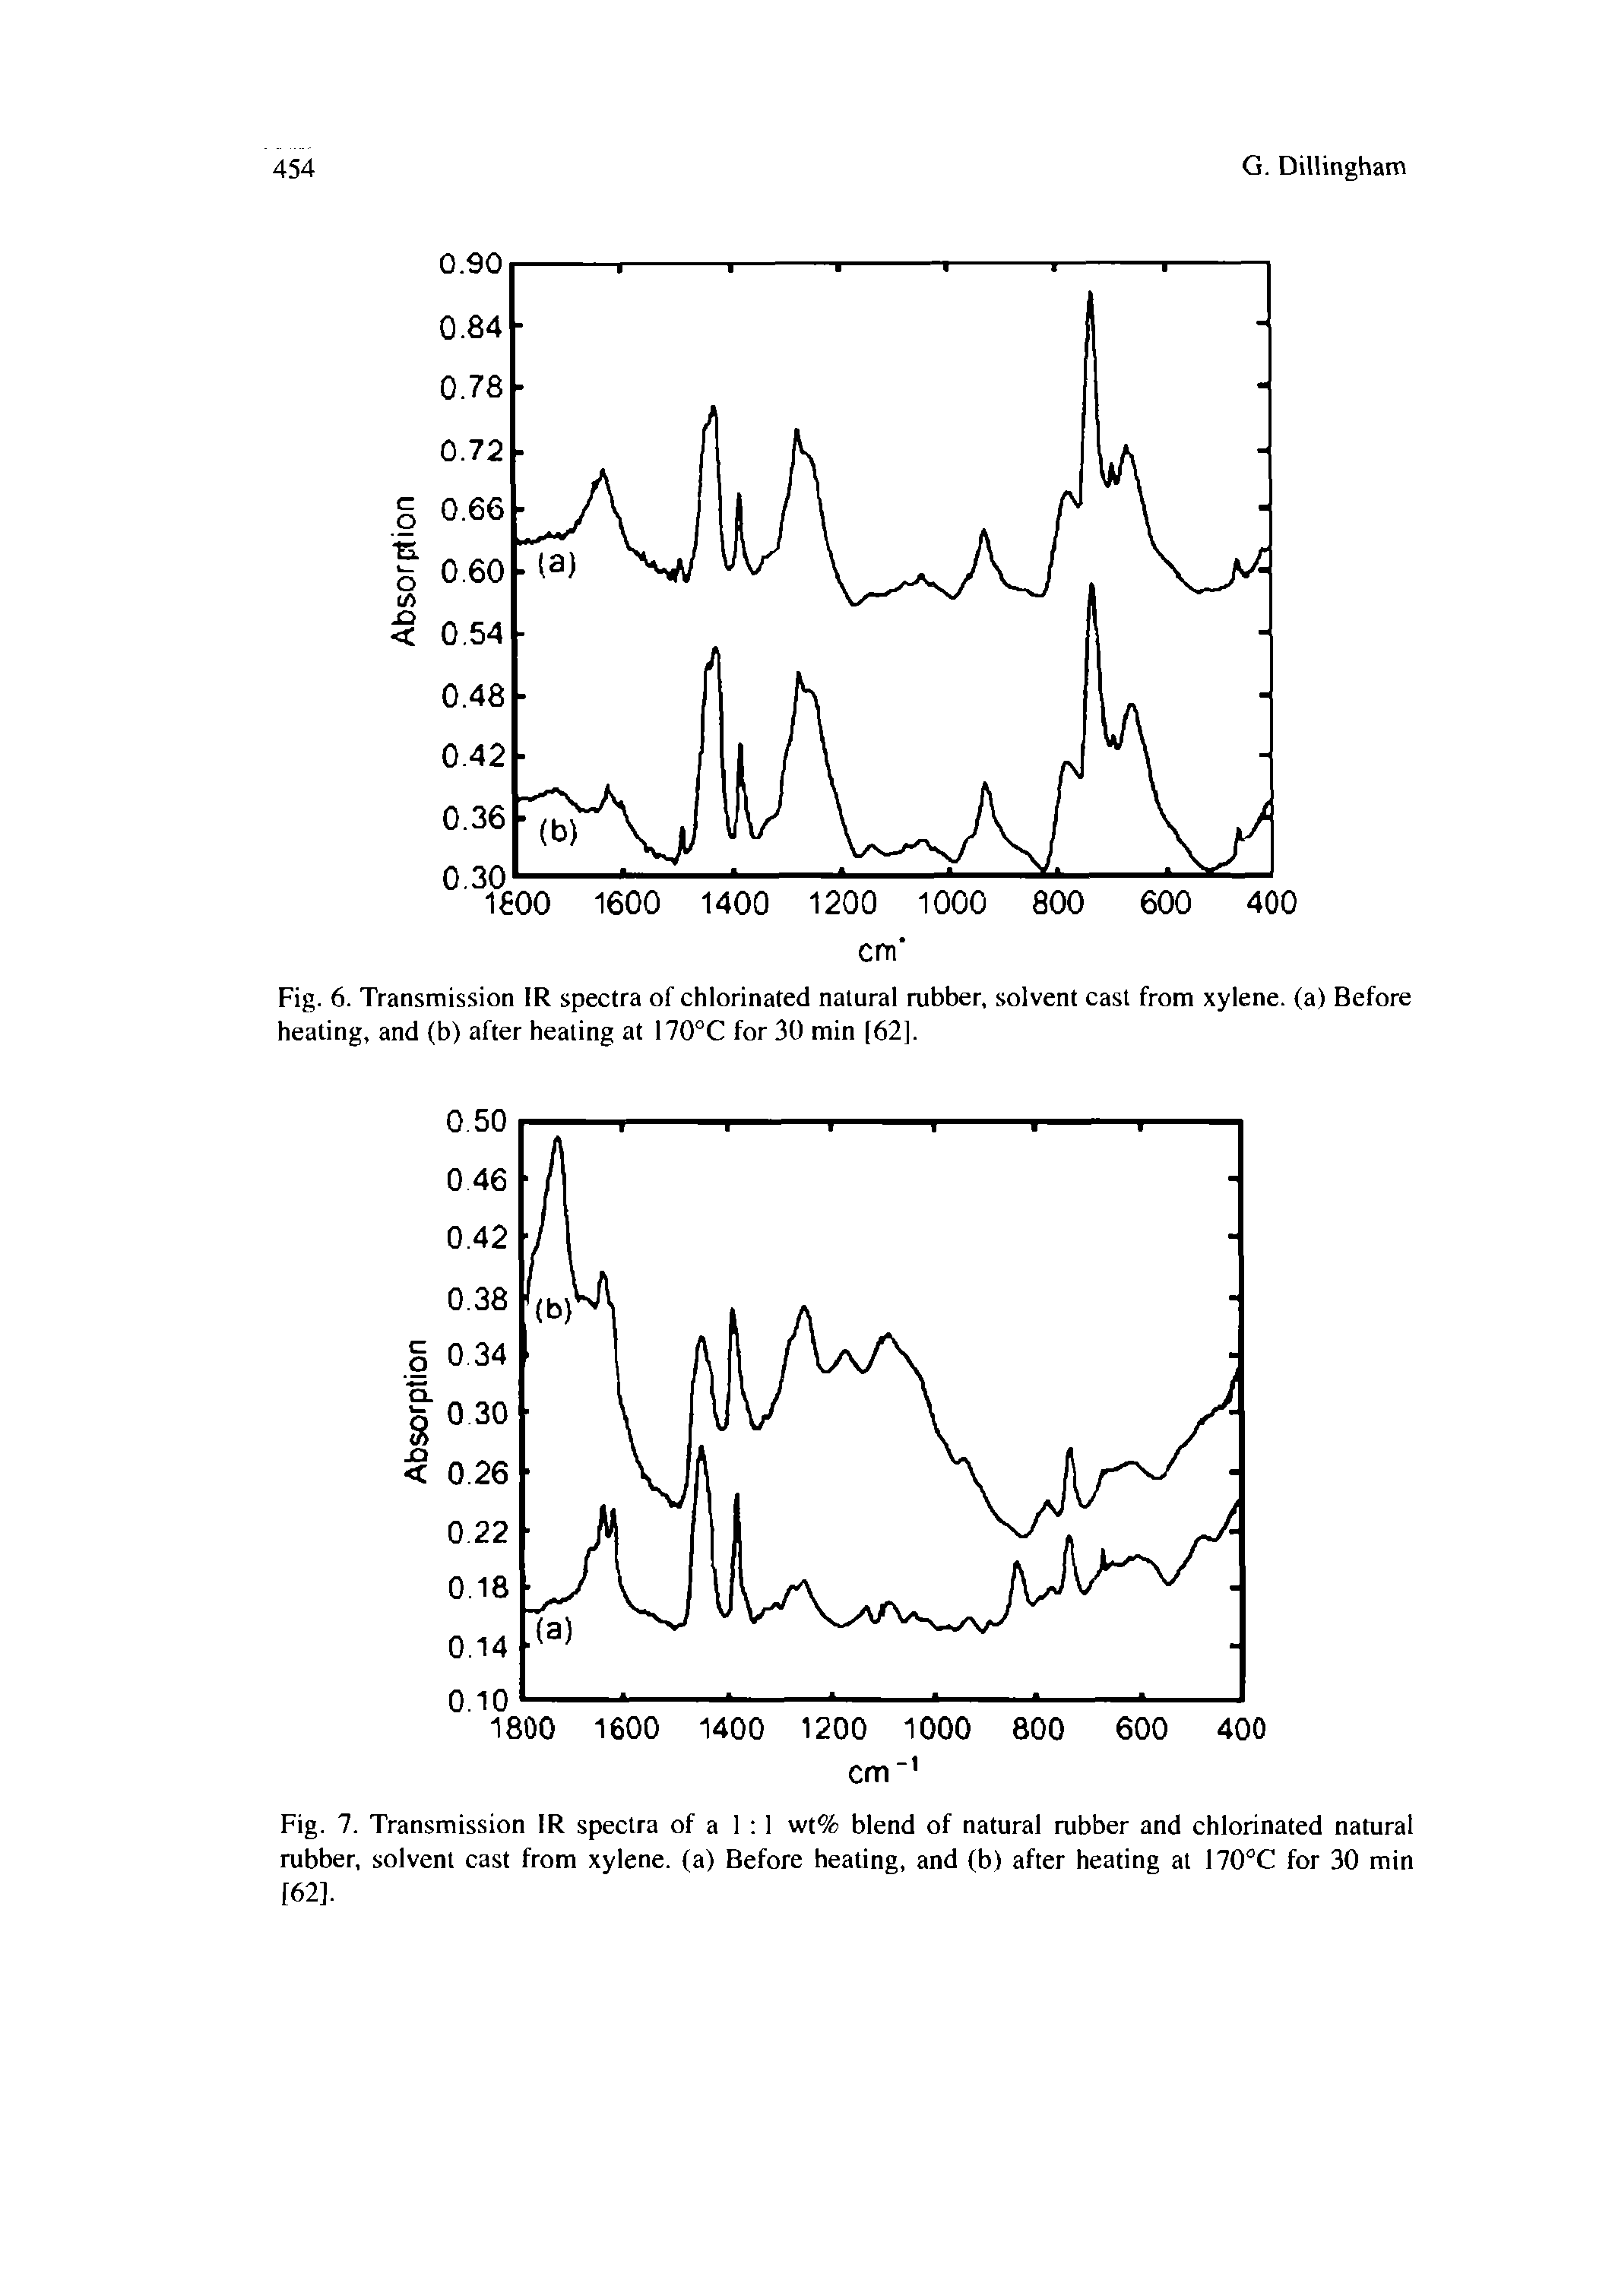 Fig. 6. Transmission IR spectra of chlorinated natural rubber, solvent cast from xylene, (a) Before heating, and (b) after heating at 170°C for 30 min [62].